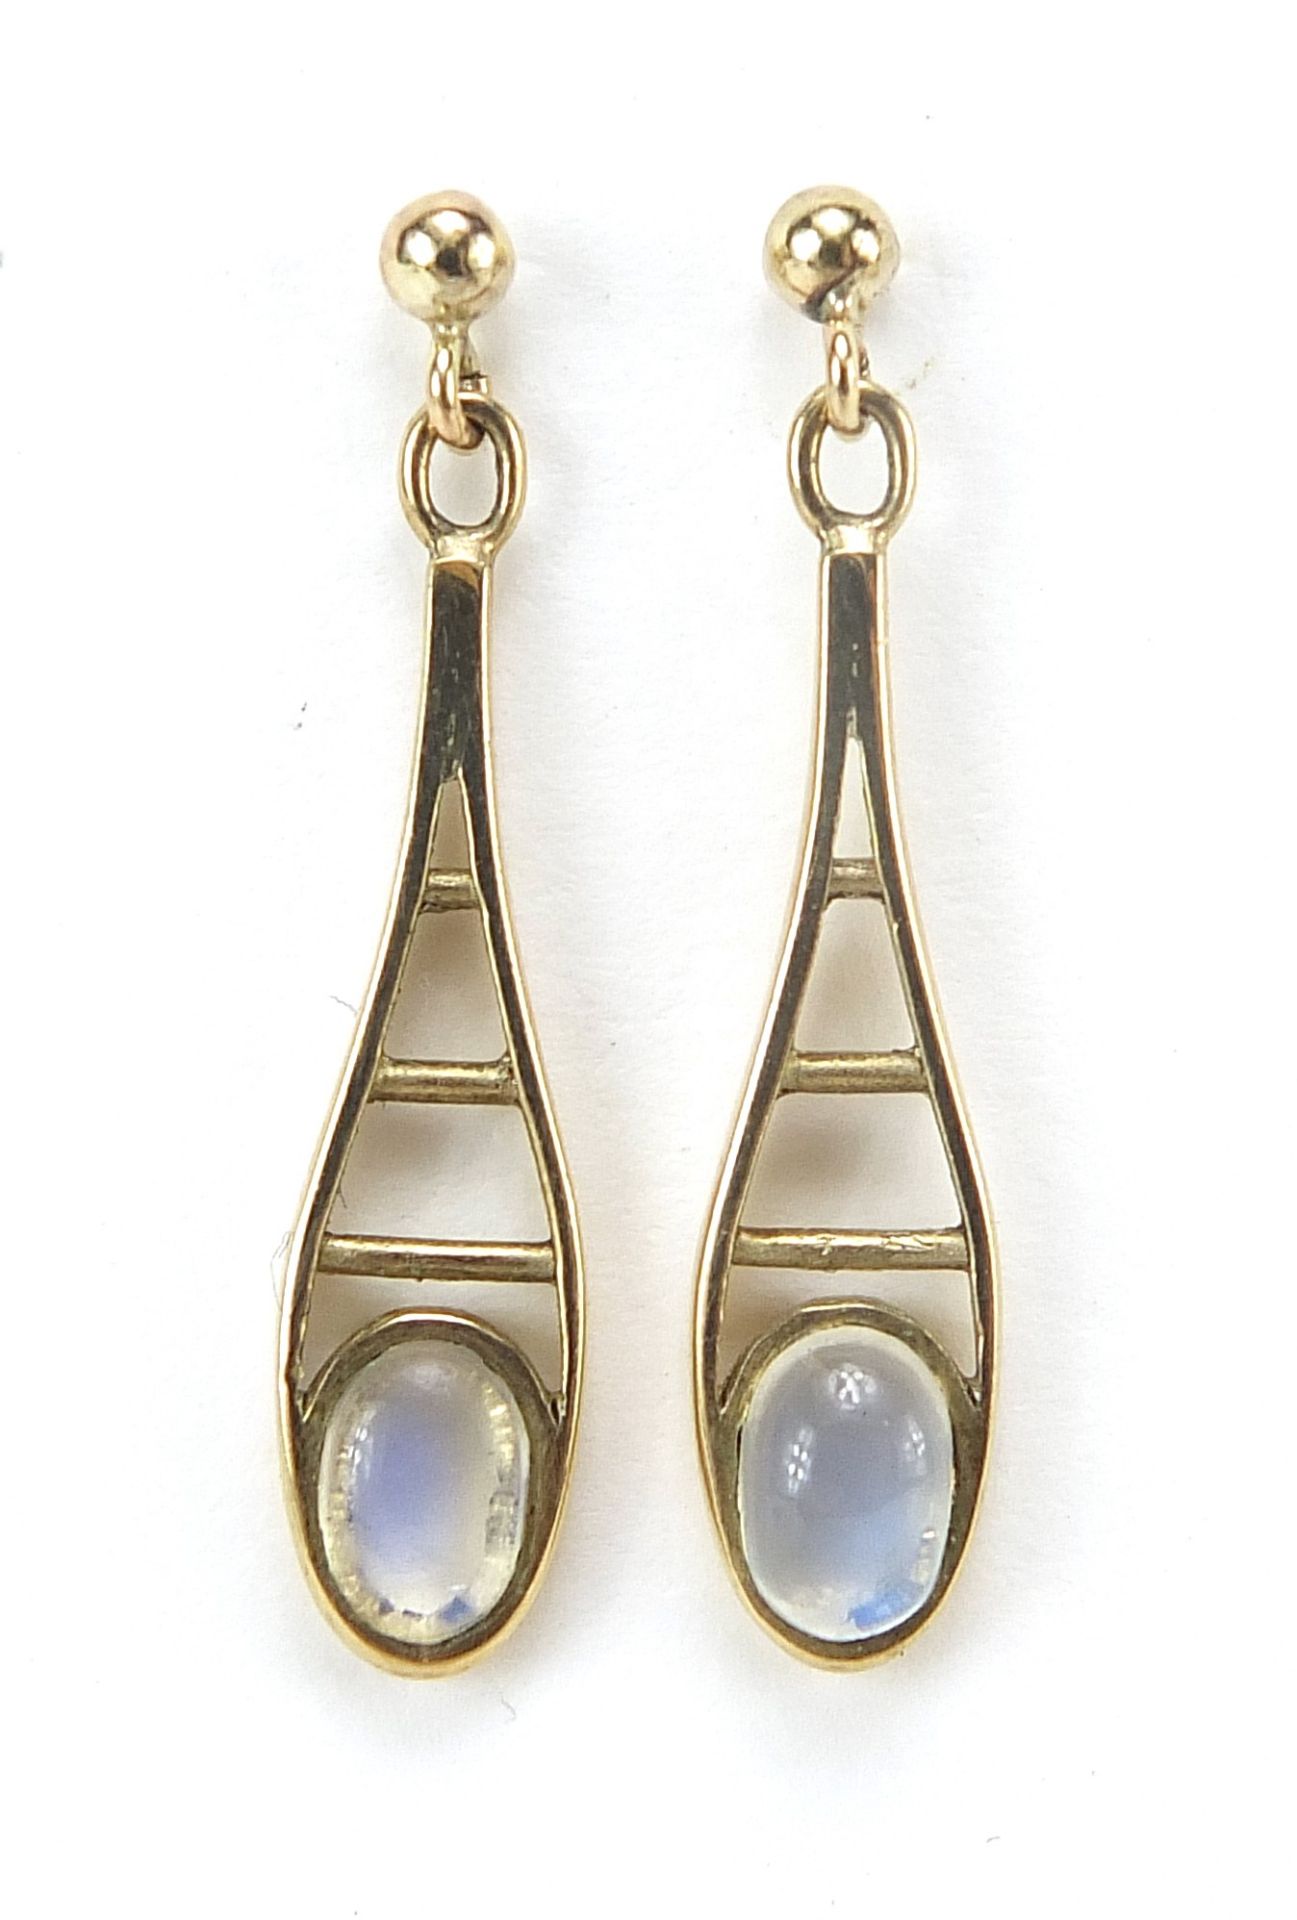 Pair of unmarked gold cabochon opal drop earrings, tests as 9ct gold, 28mm high, 2.1g